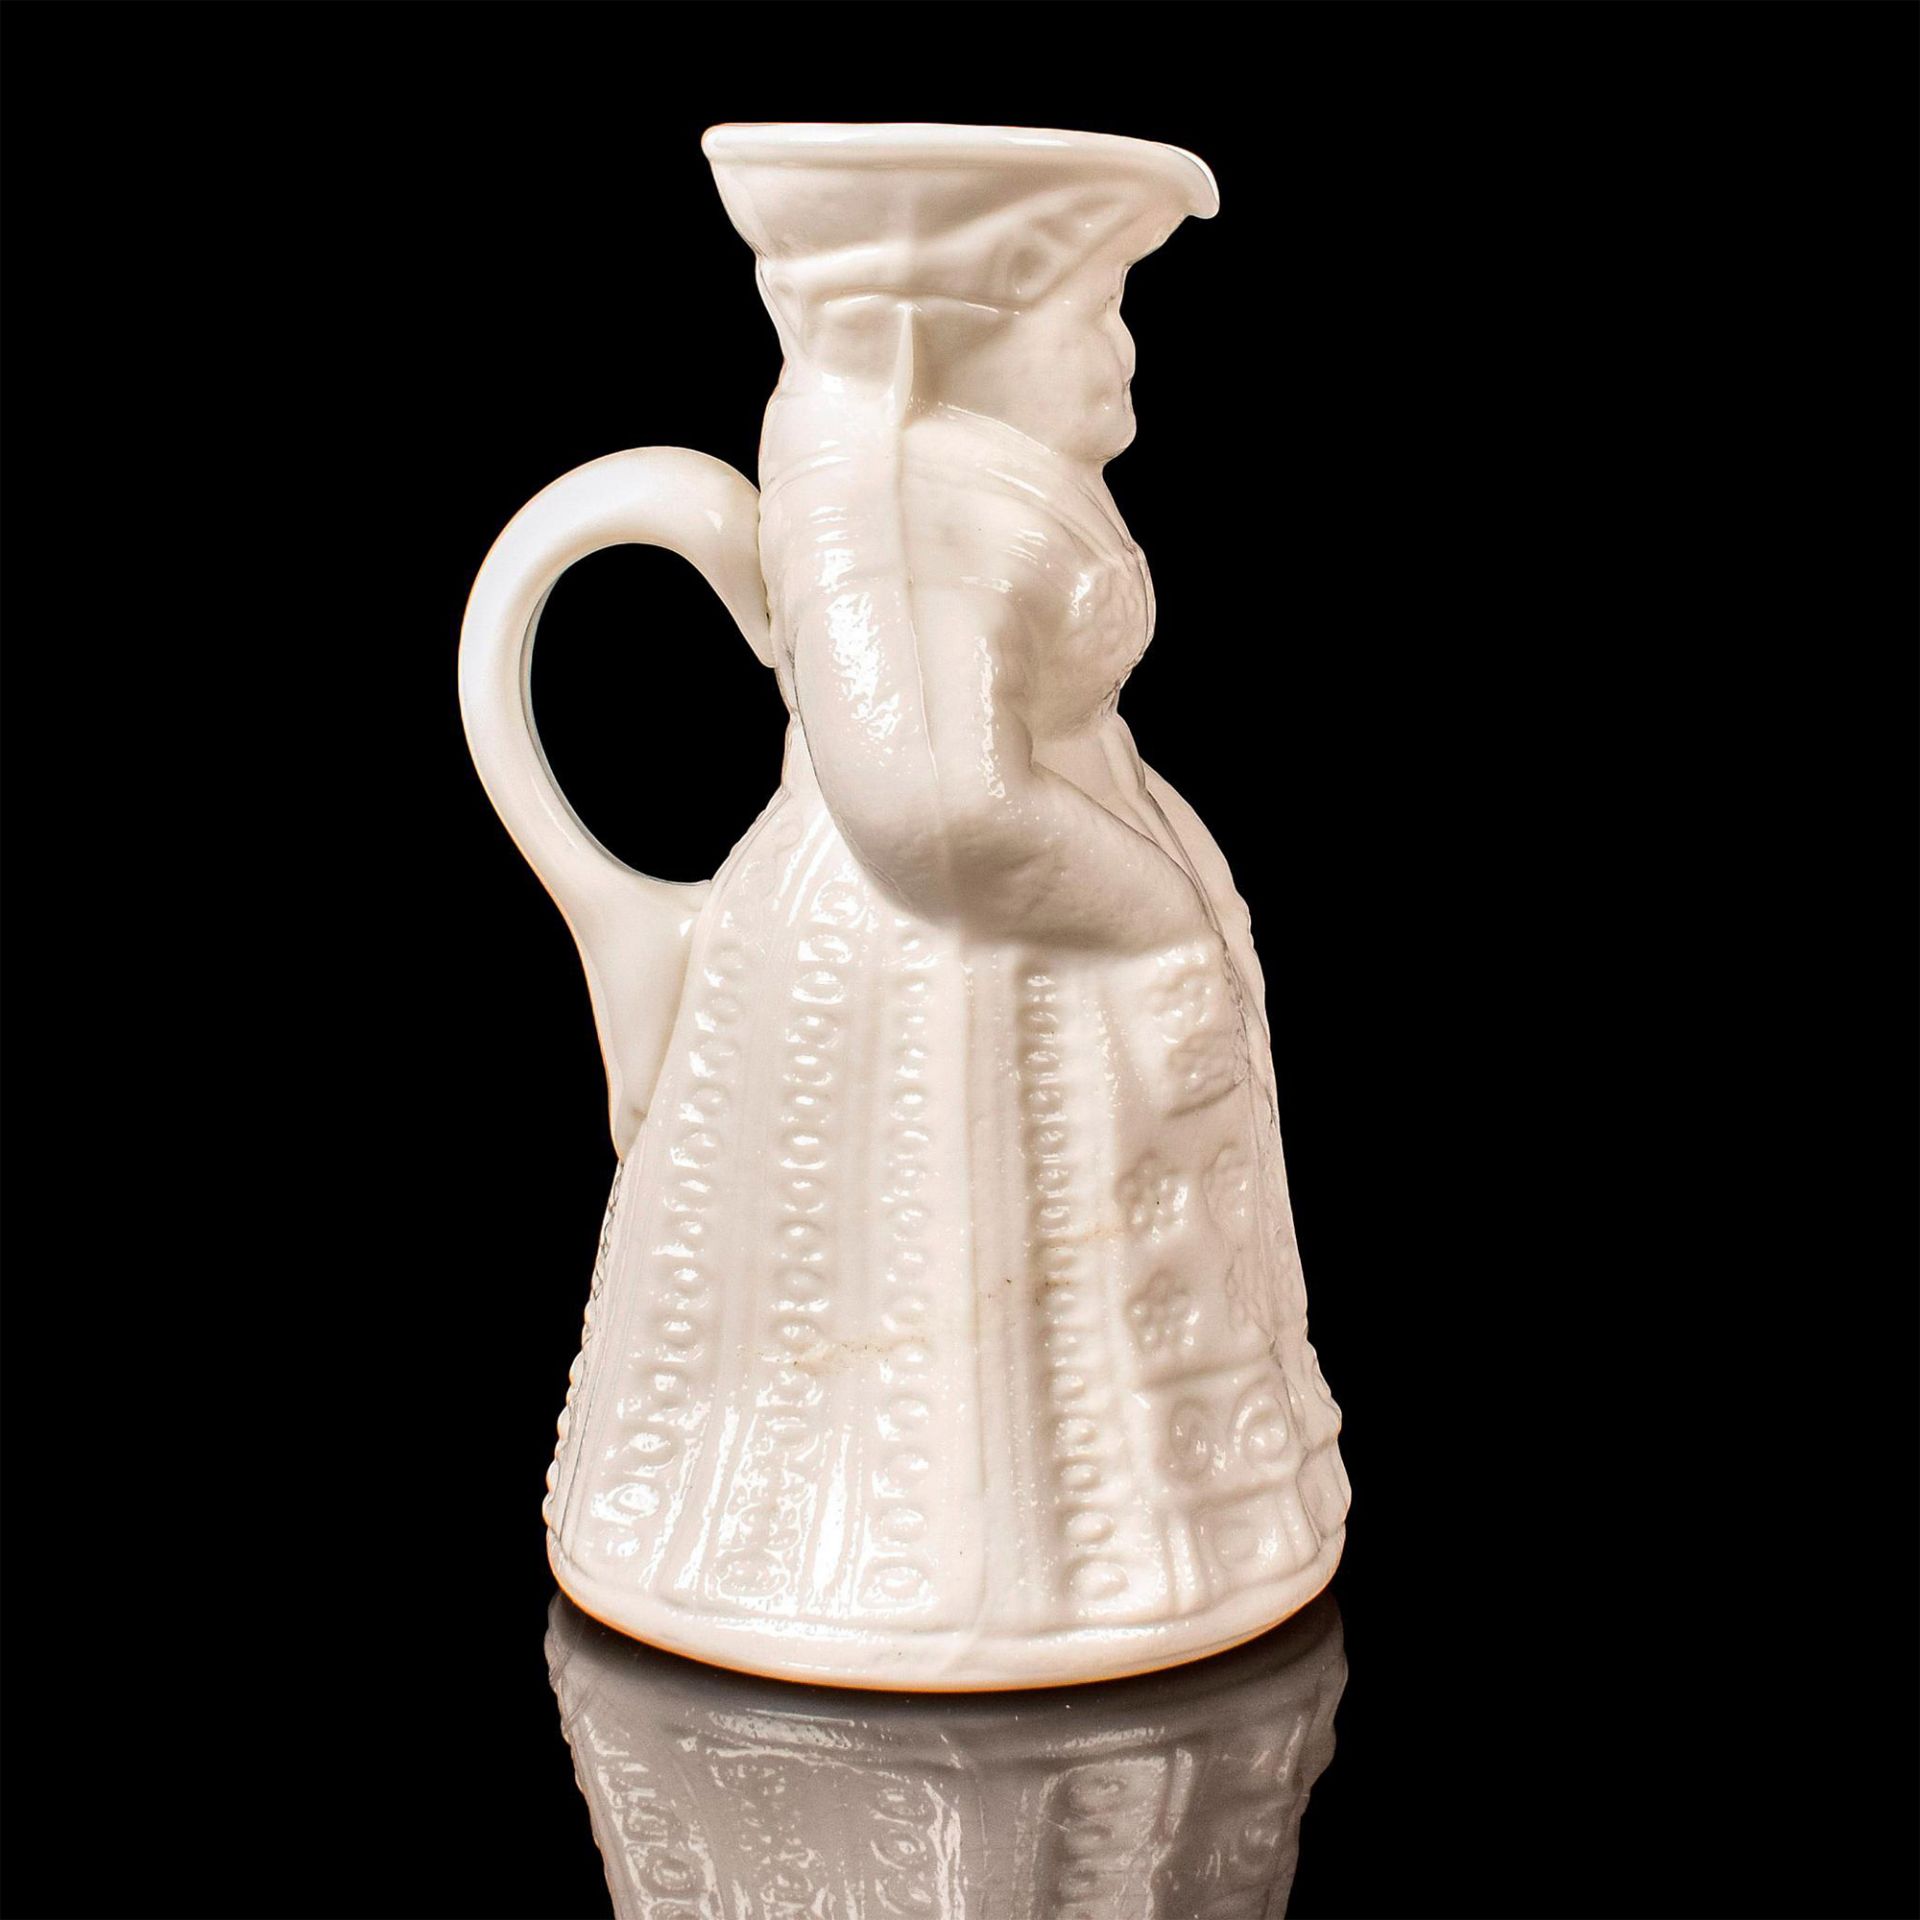 Kanawha Milk Glass Syrup Pitcher, Colonial Woman - Image 4 of 5